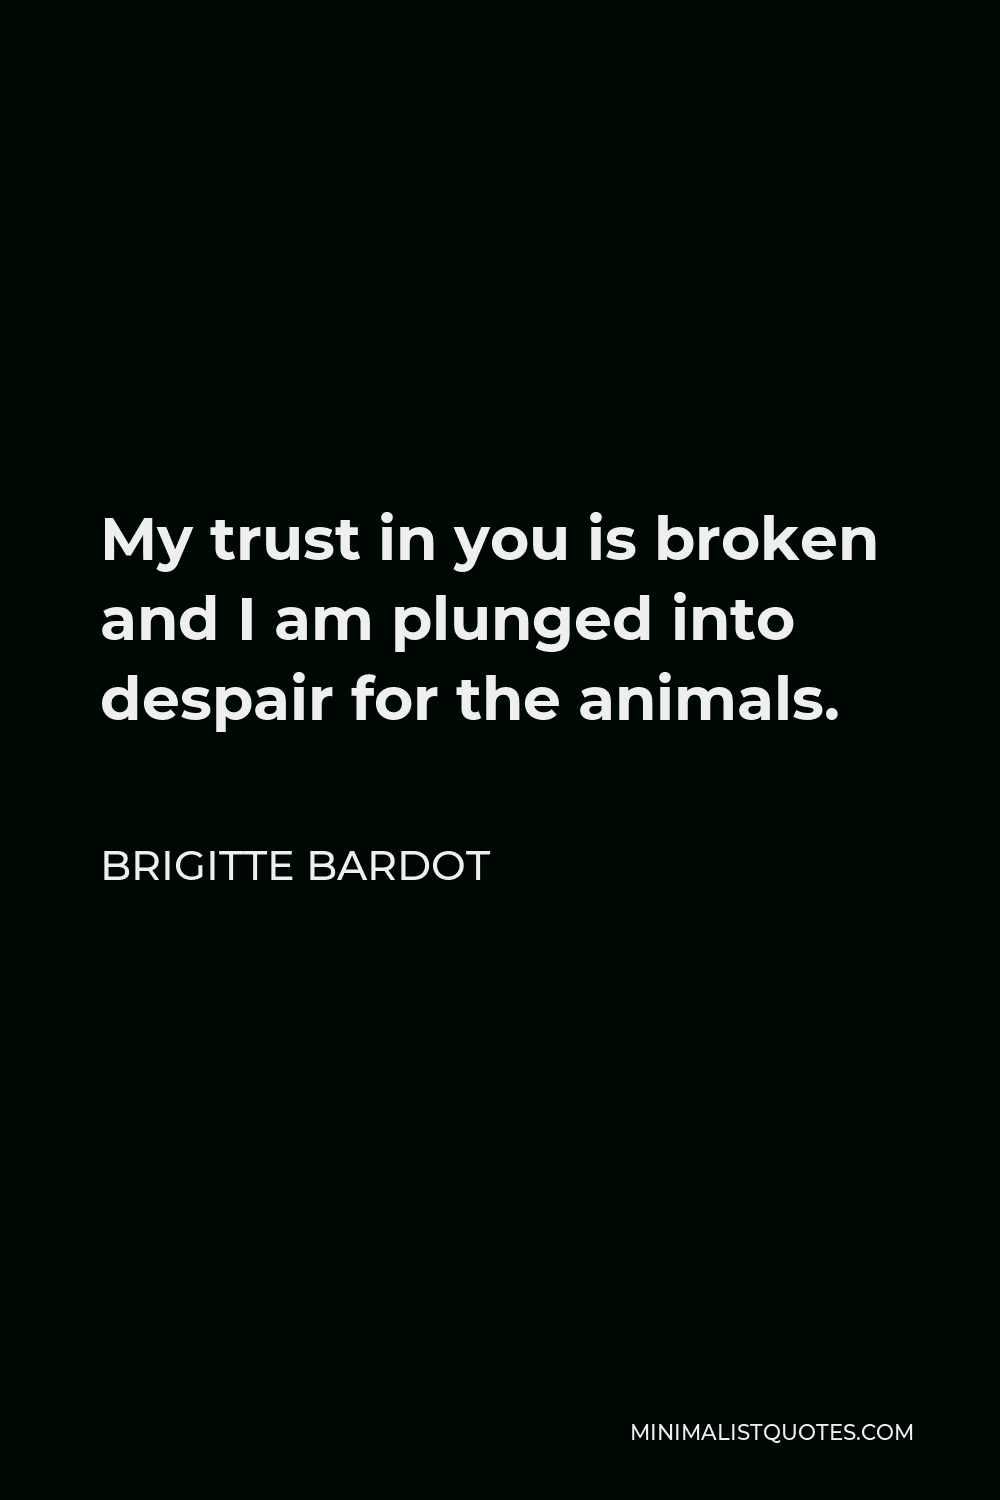 Brigitte Bardot Quote - My trust in you is broken and I am plunged into despair for the animals.